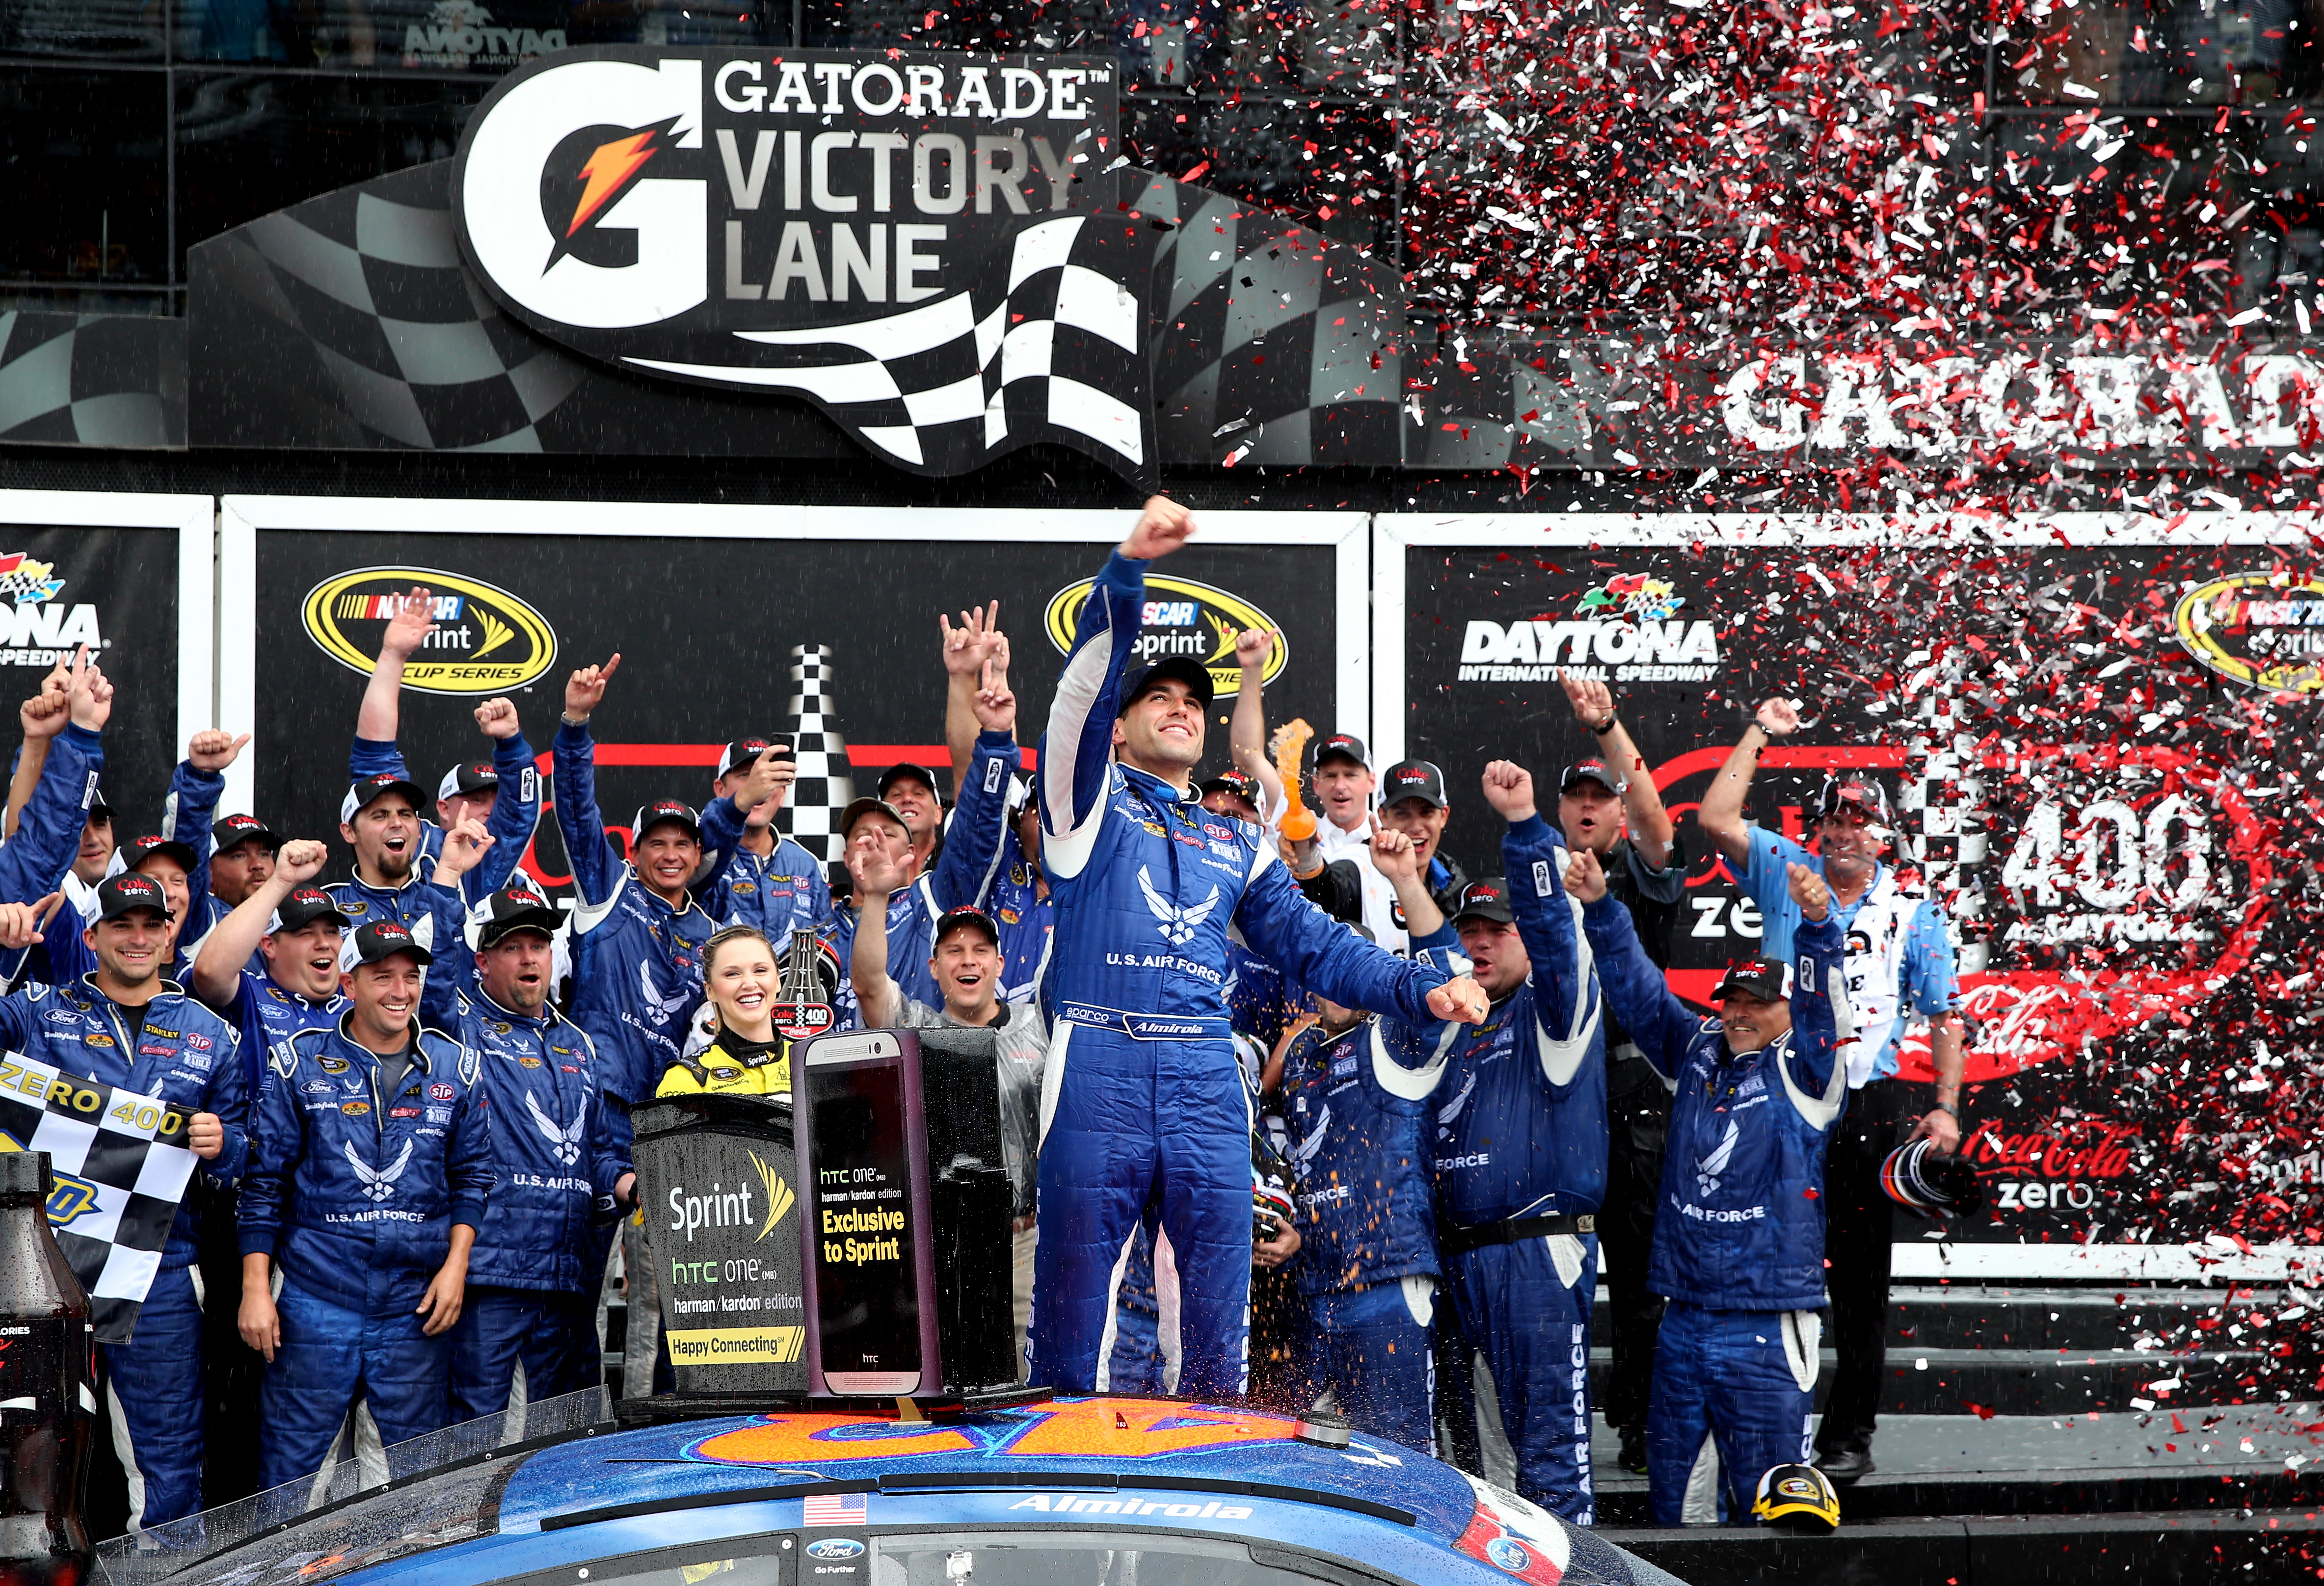 It was a rainy weekend in Daytona.  It ended with Aric Almirola in victory lane, the first for the No. 43 since 1999.